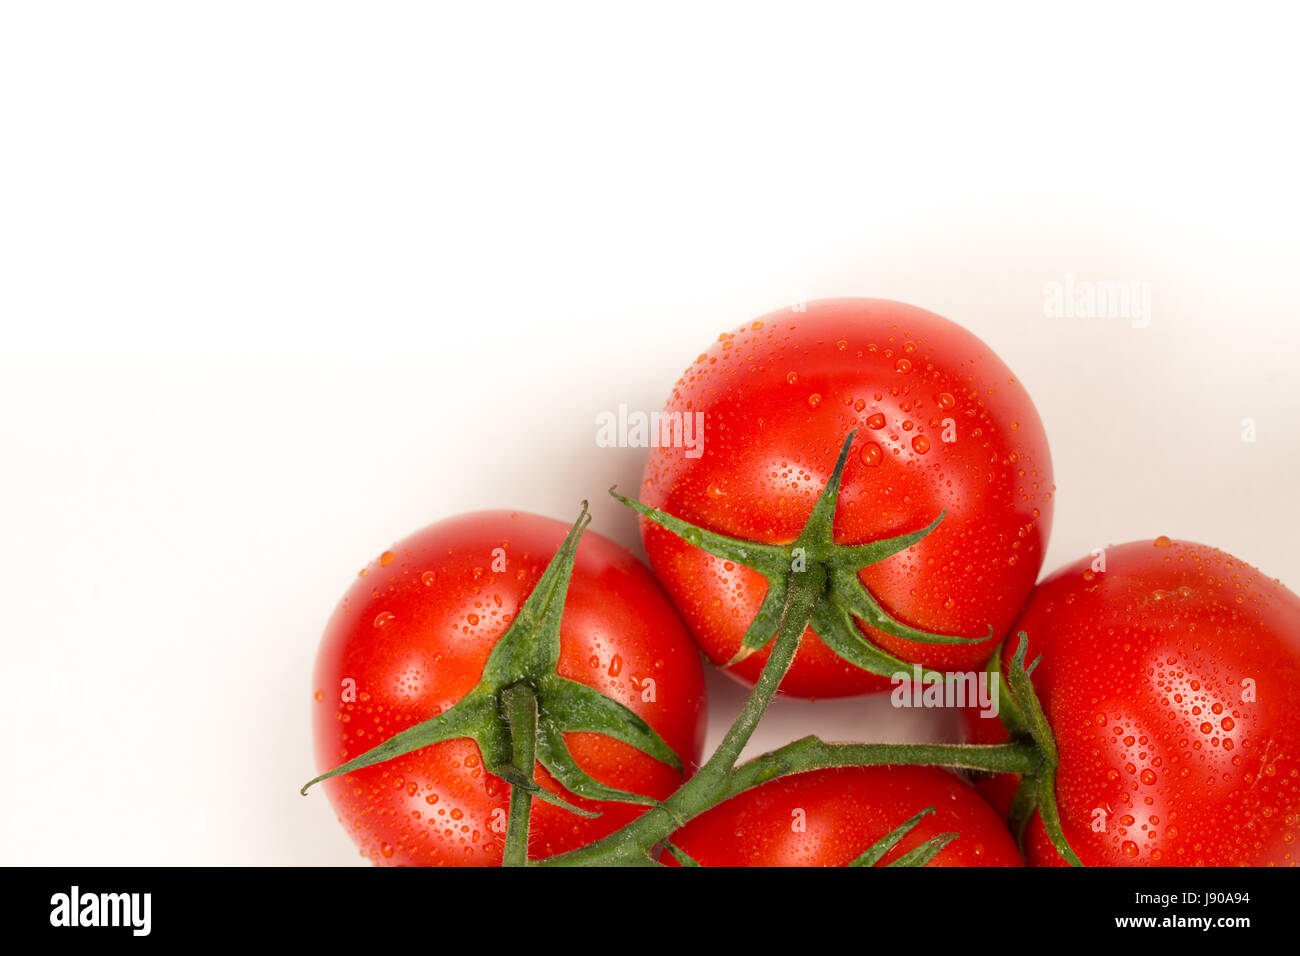 Red fresh tomatoes isolated on white background Stock Photo